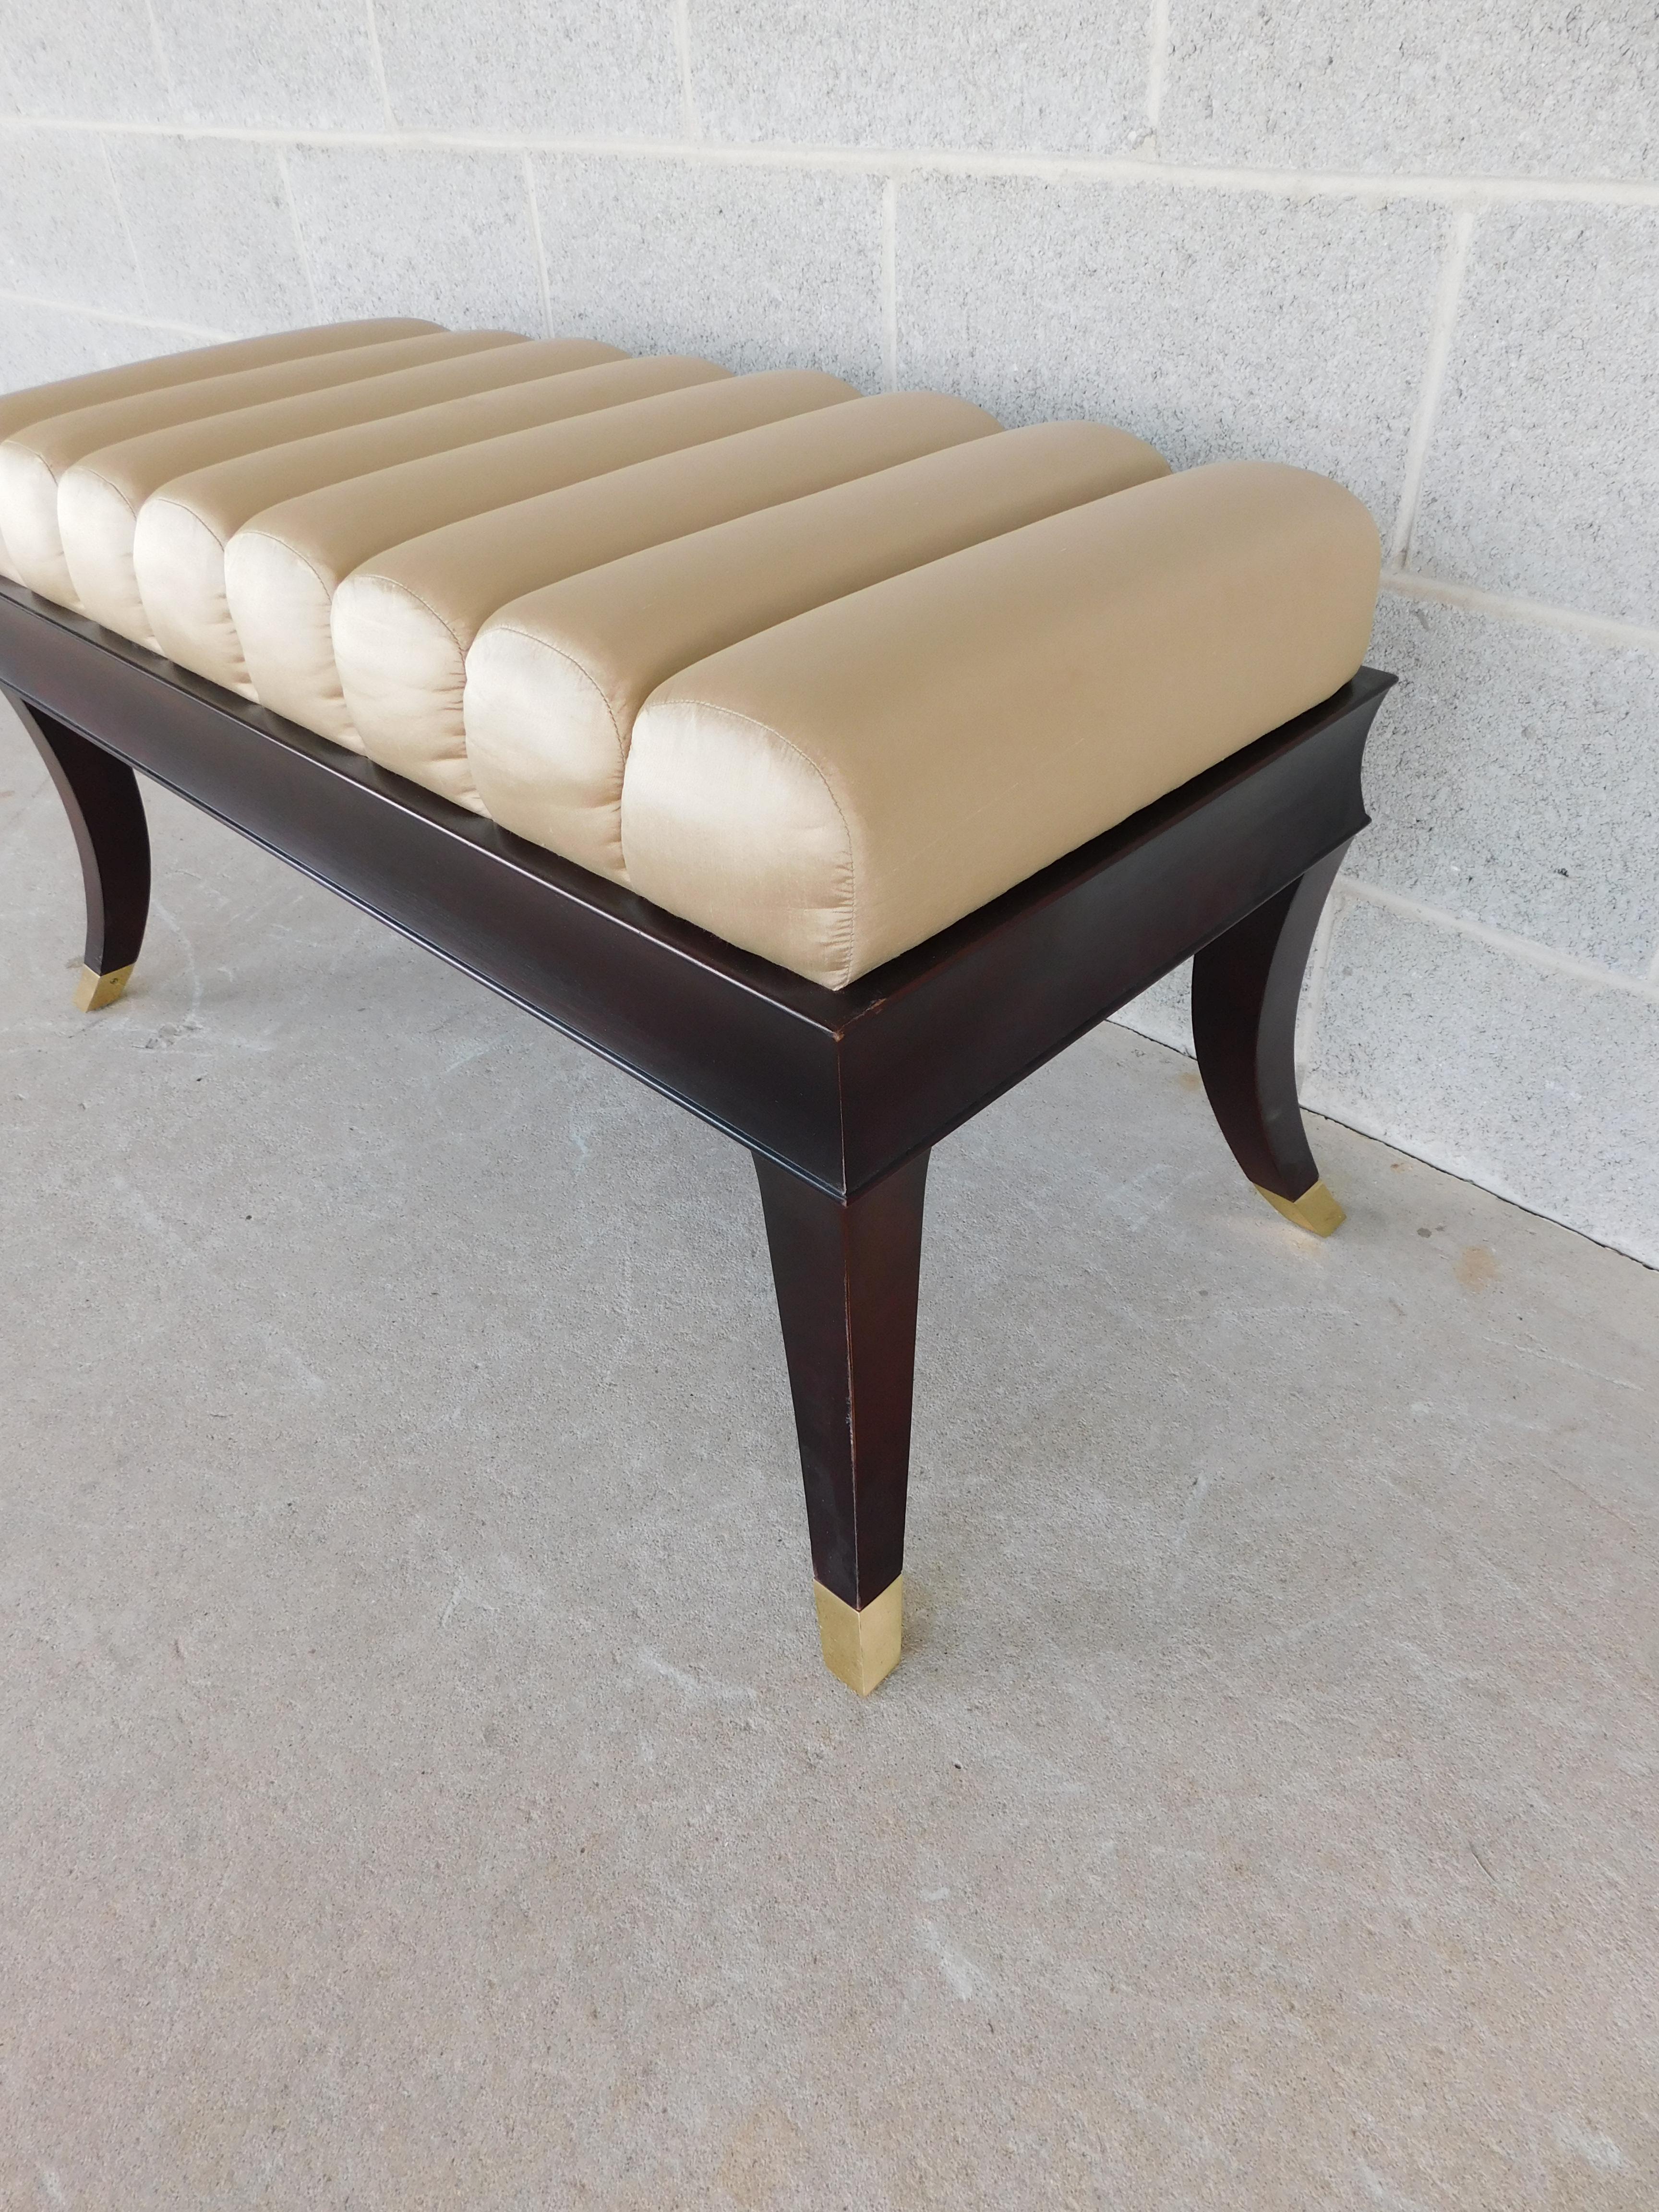 Contemporary Baker Regency Style Mahogany Frame Settee Bench For Sale